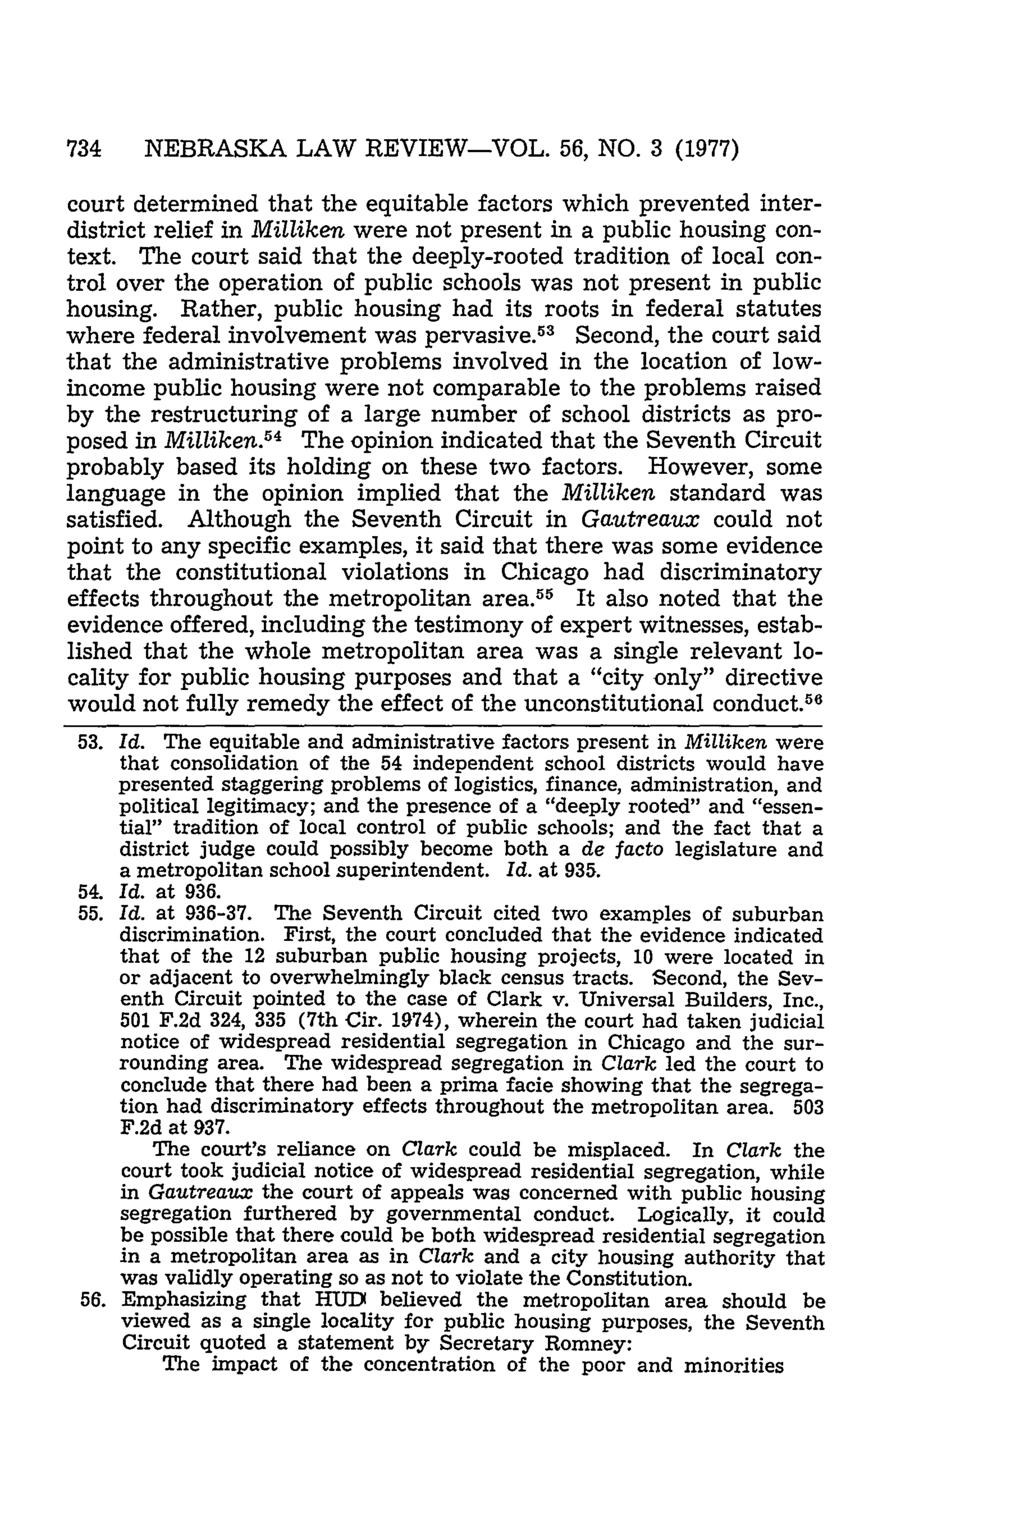 734 NEBRASKA LAW REVIEW-VOL. 56, NO. 3 (1977) court determined that the equitable factors which prevented interdistrict relief in Milliken were not present in a public housing context.